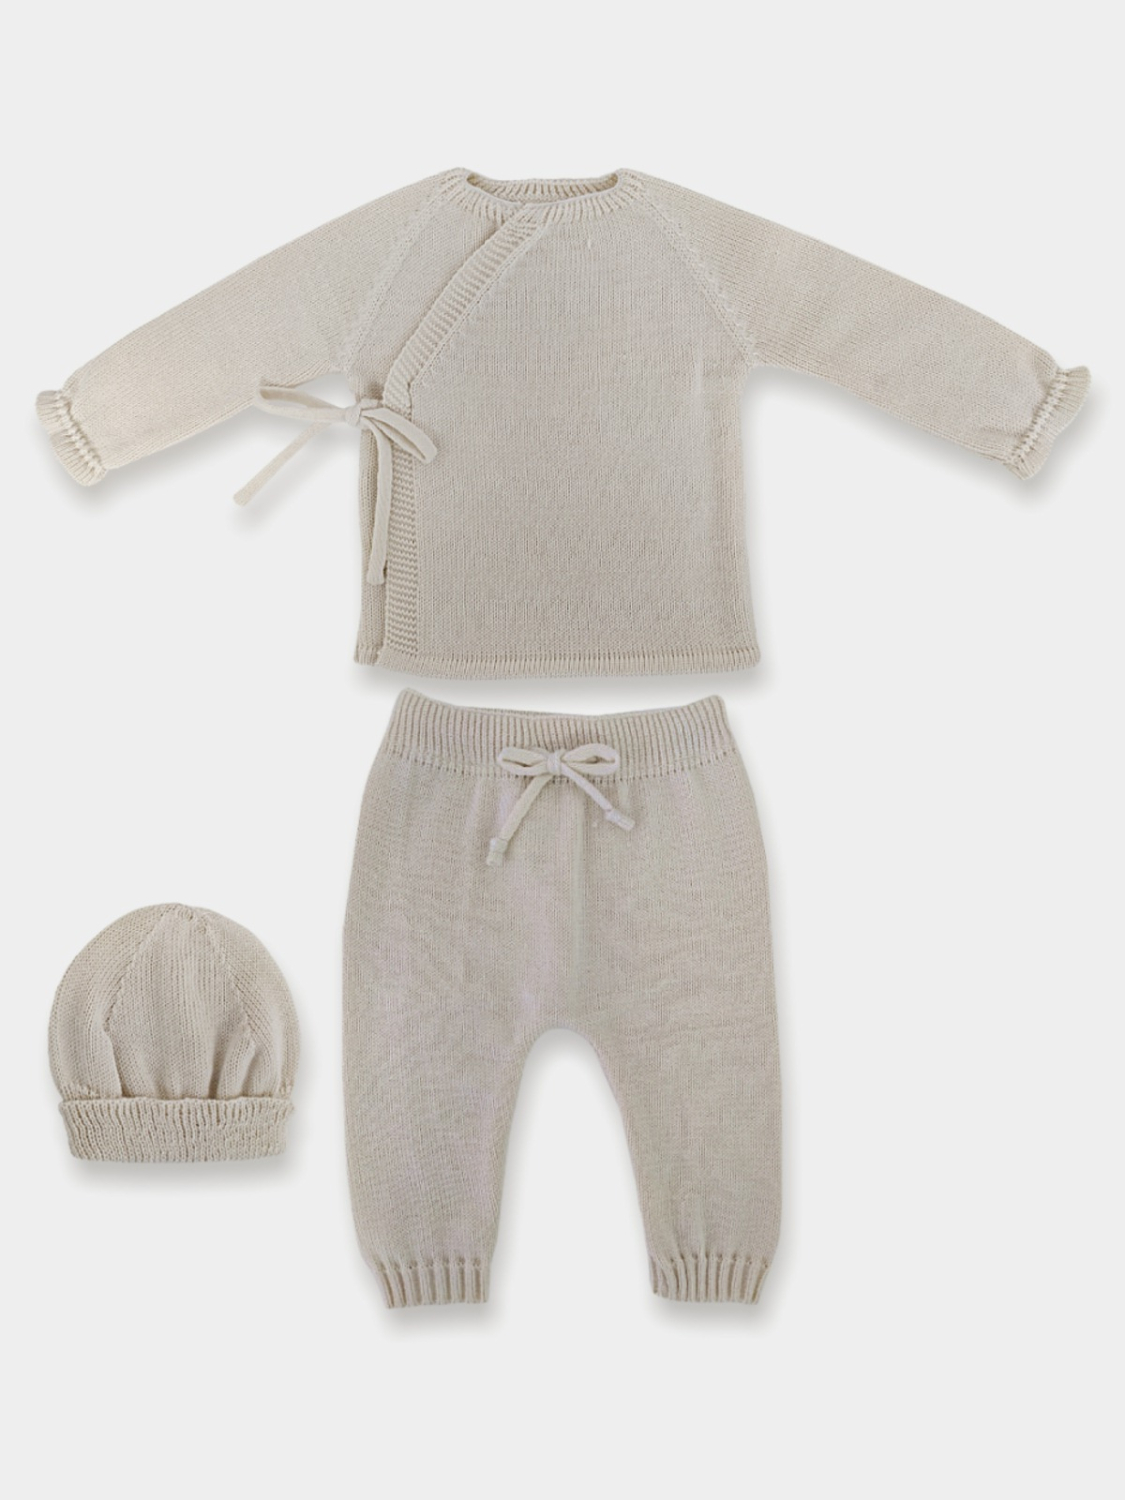 Beige Crossover-Baby-Outfit